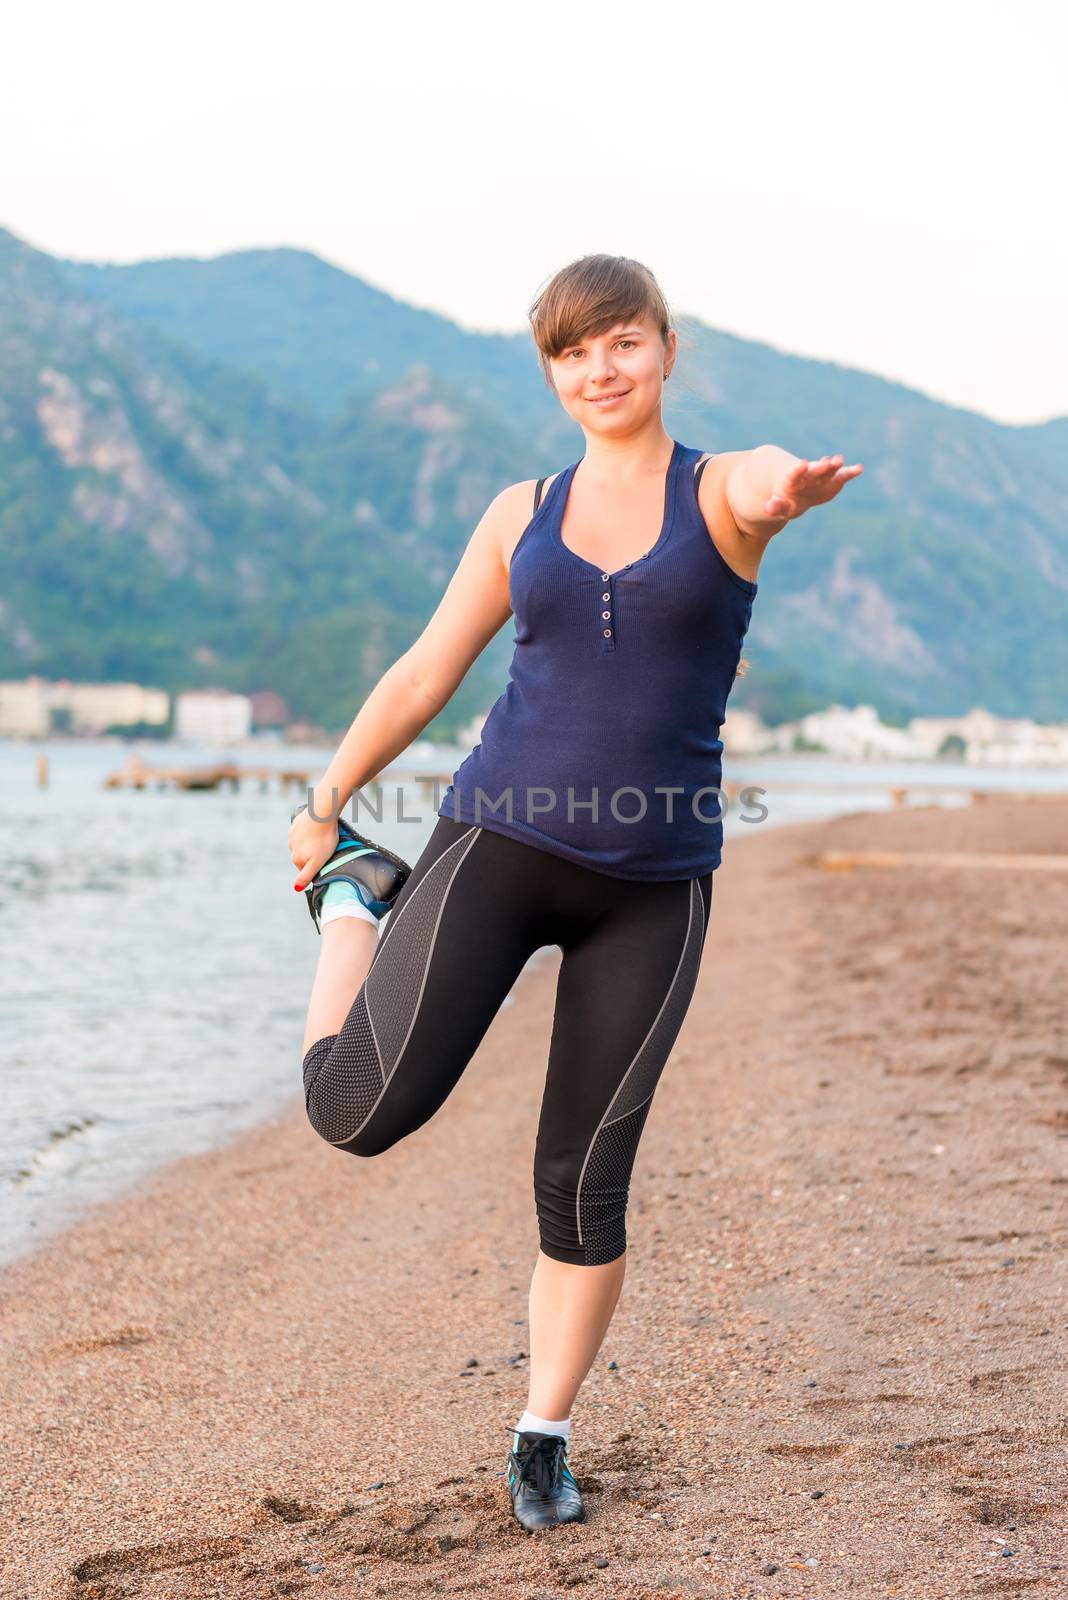 athletic girl warming up before playing sports